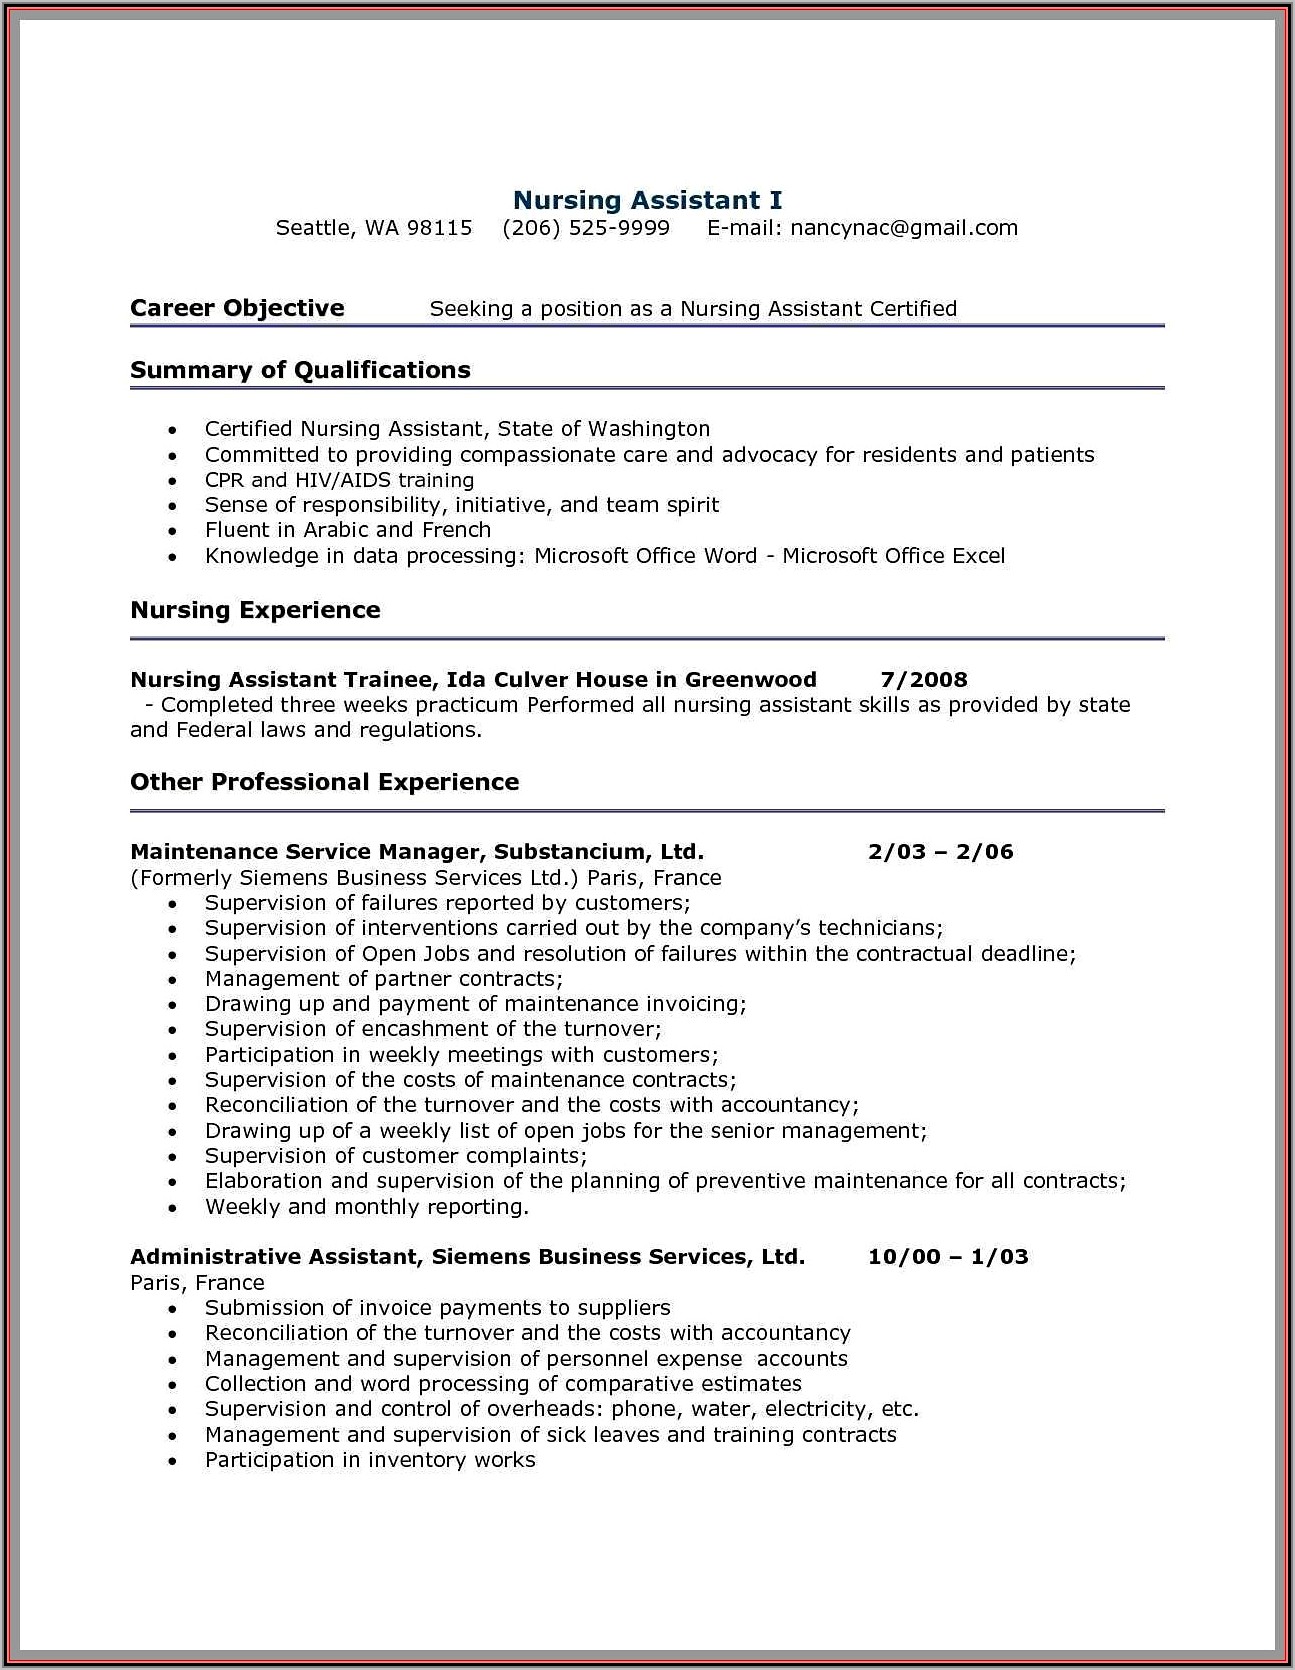 Free Resume Templates For Certified Nursing Assistant